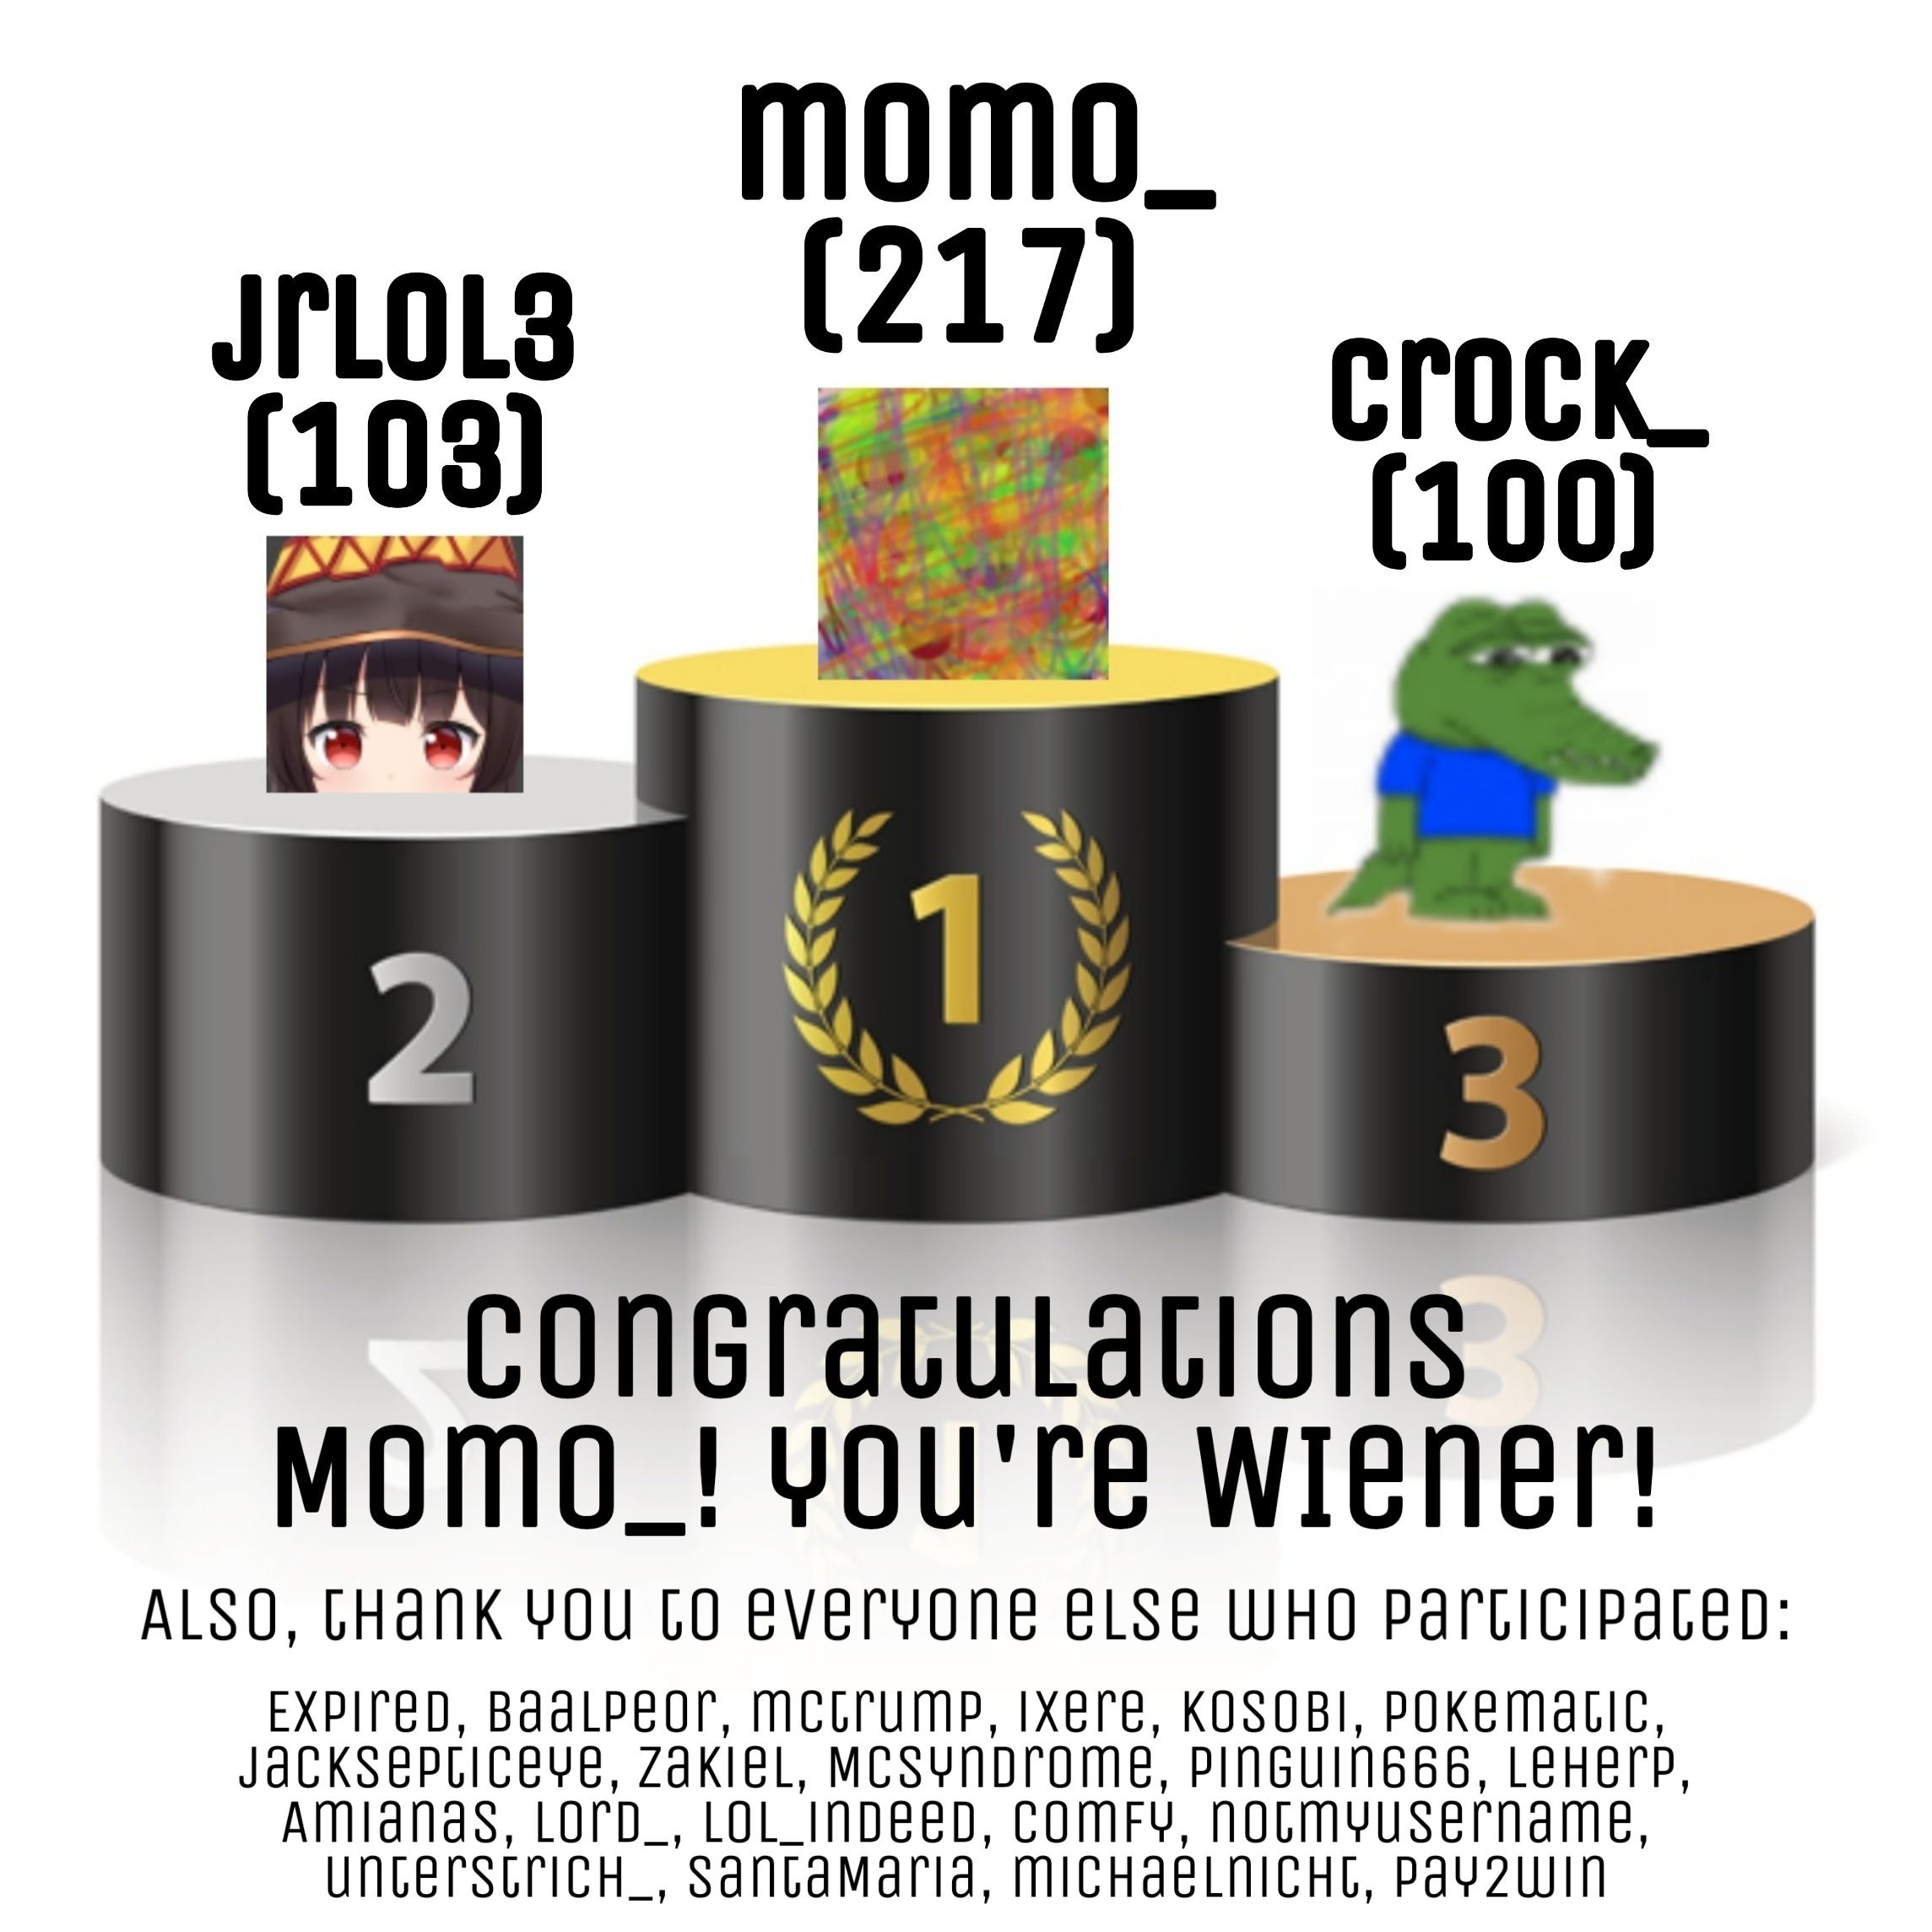 Announcing the winner of July OC Jamboree: momo_! Also: Final rankings and achievements in comments